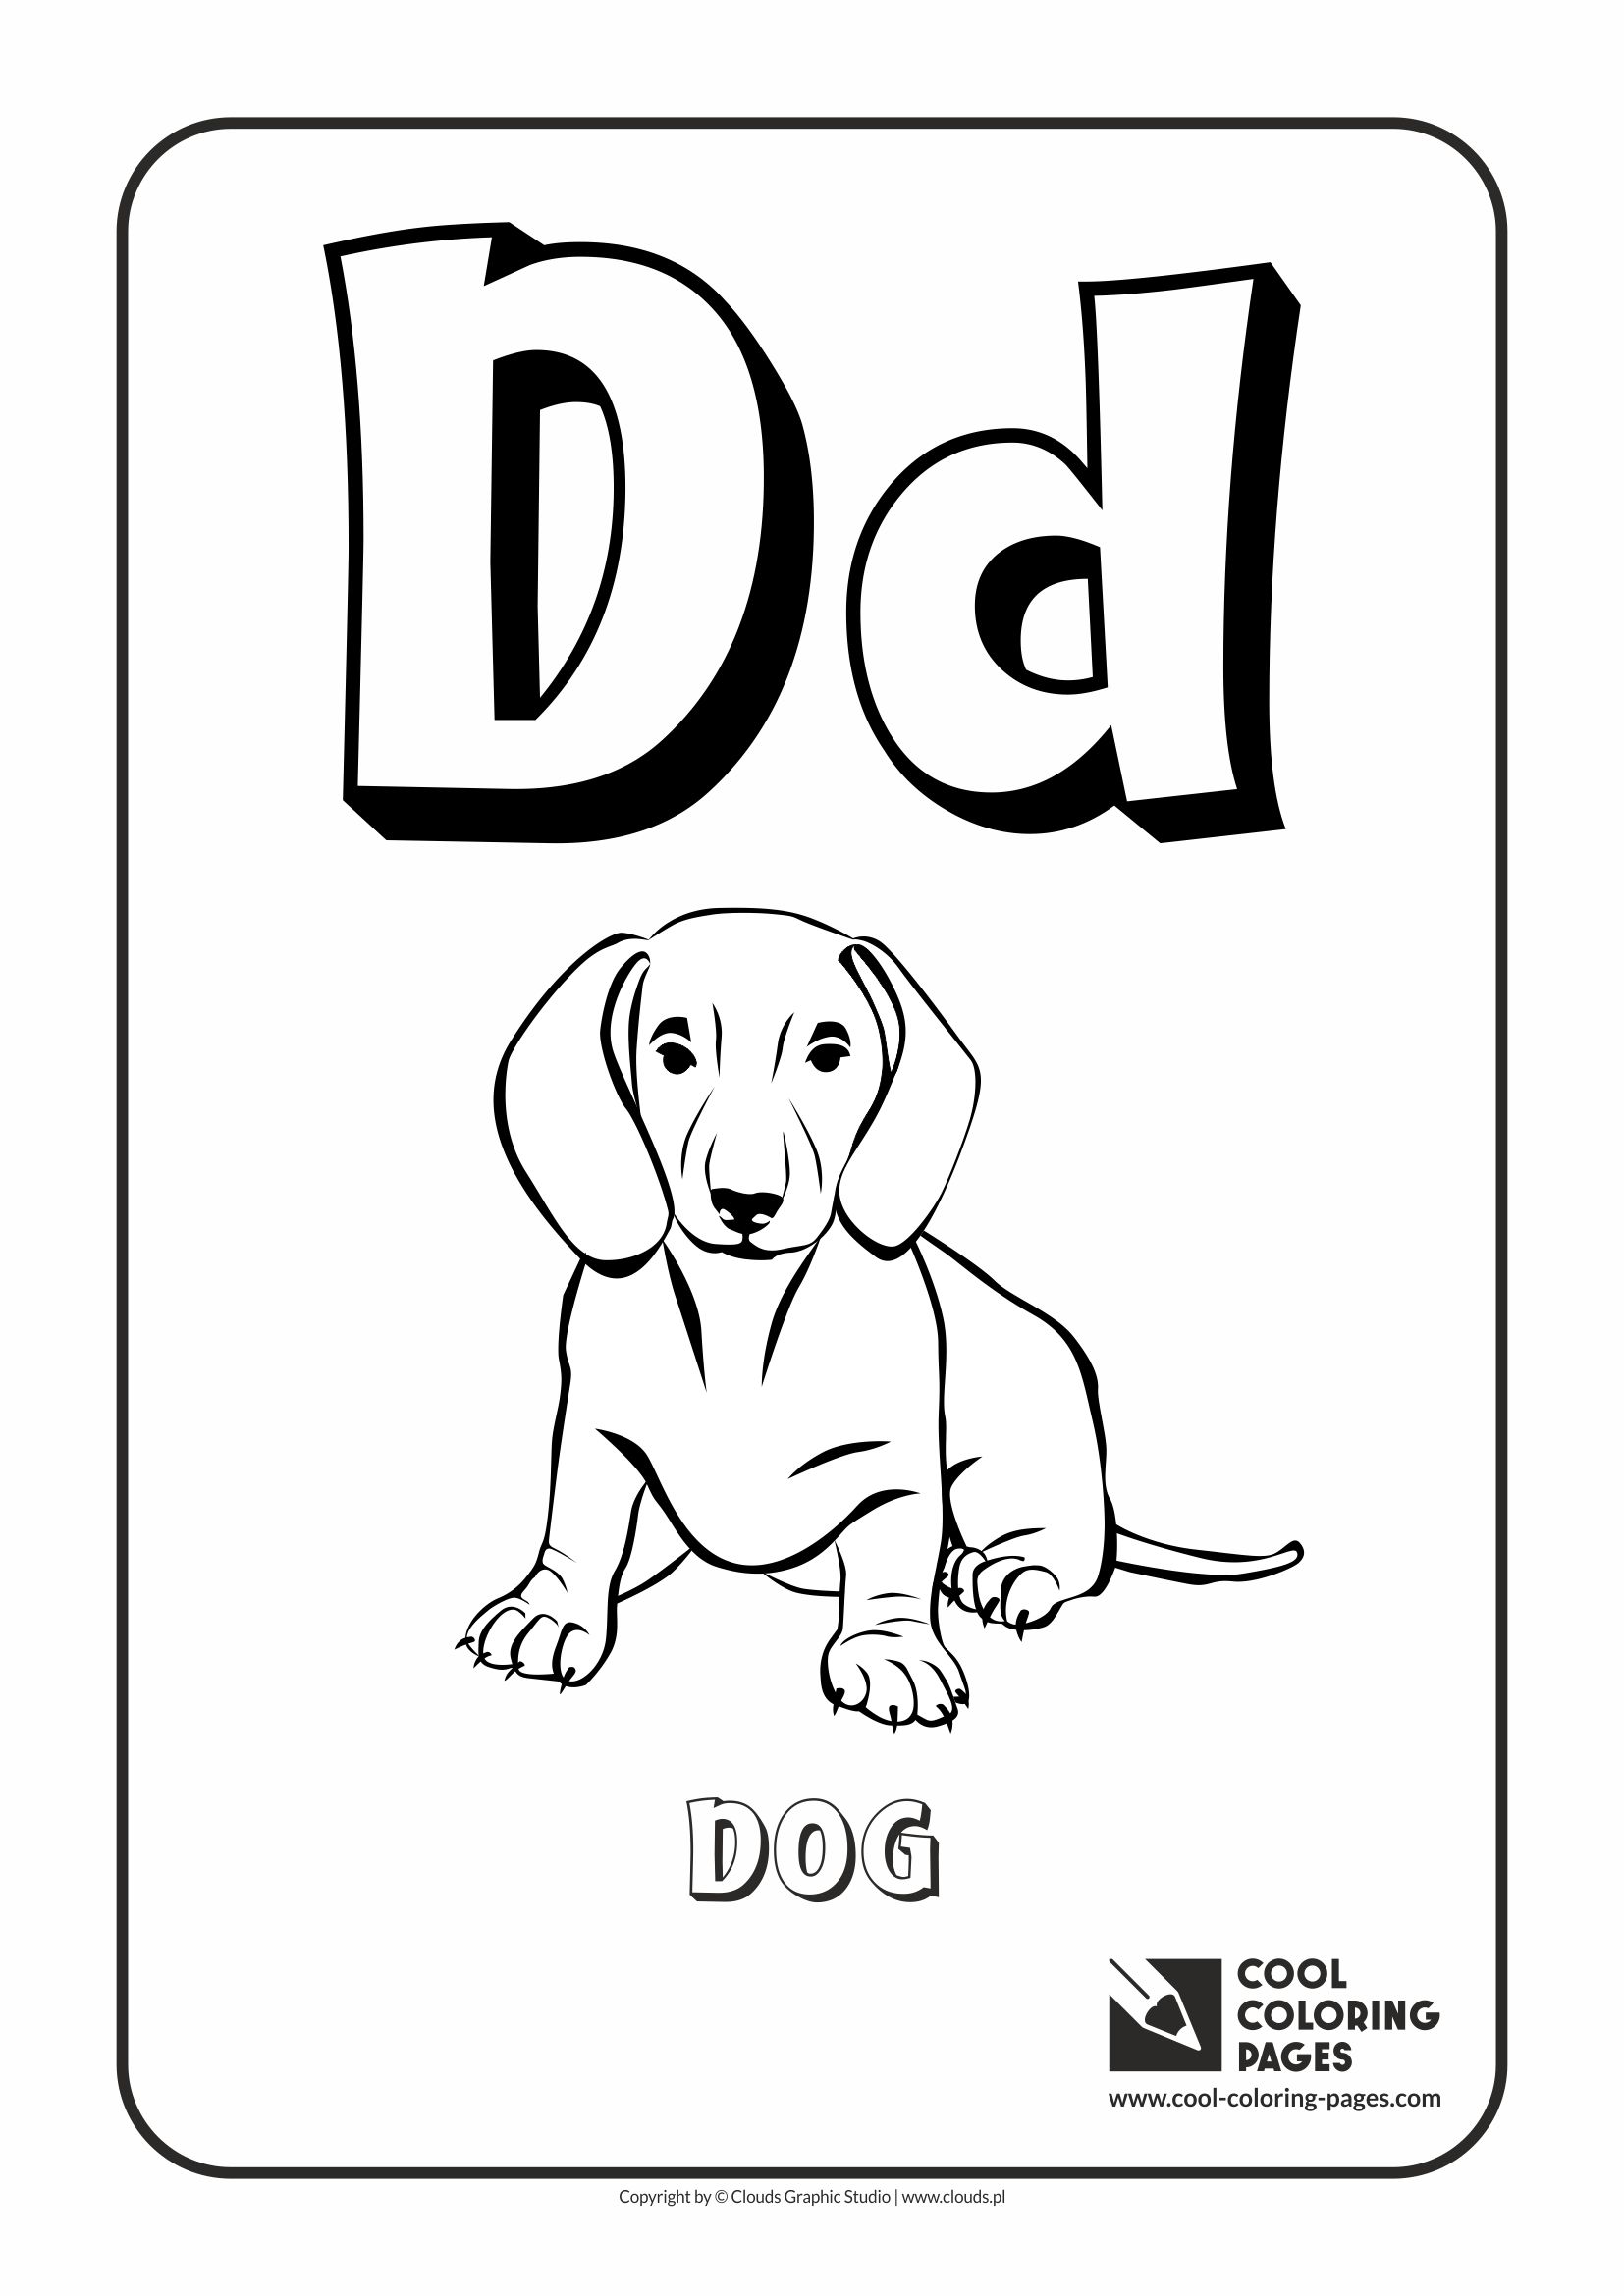 Cool Coloring Pages - Alphabet / Letter D / Coloring page with letter D